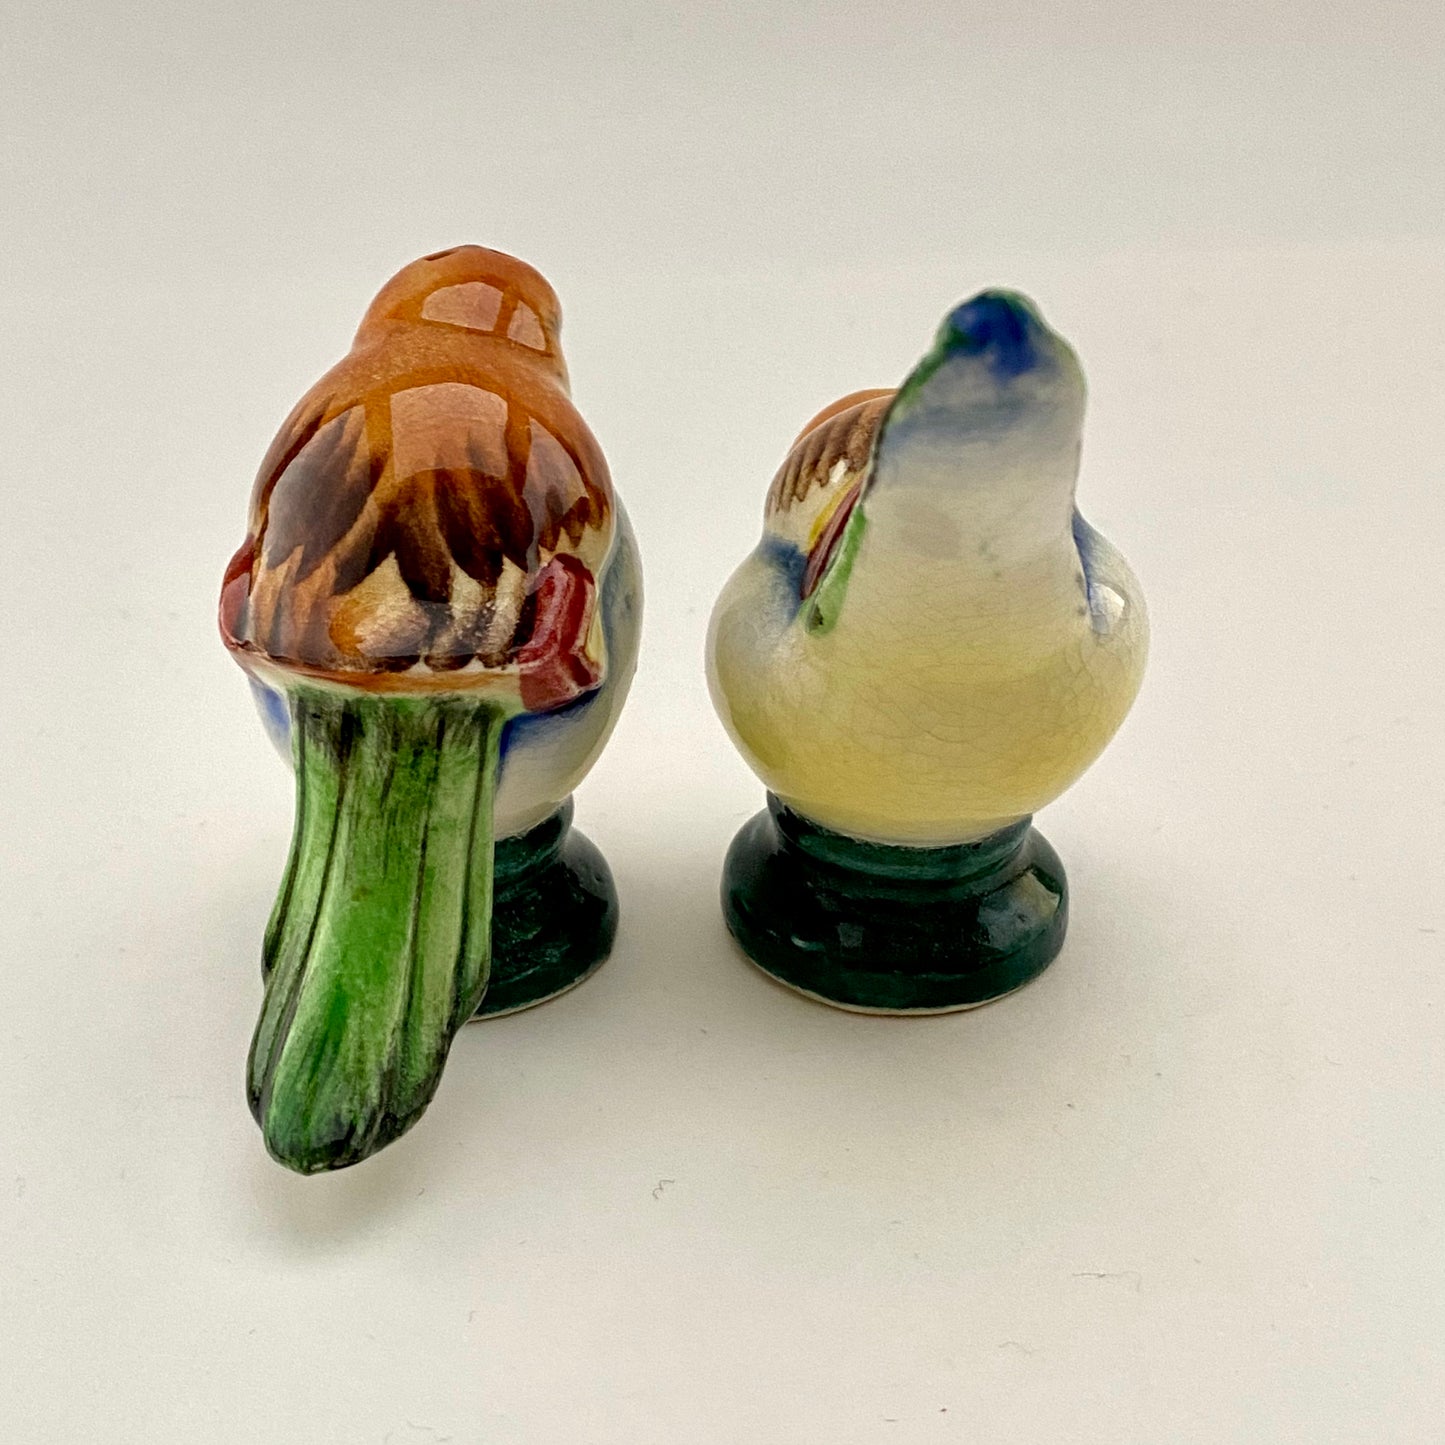 Late 50s/ Early 60s Japan Salt & Pepper Shakers